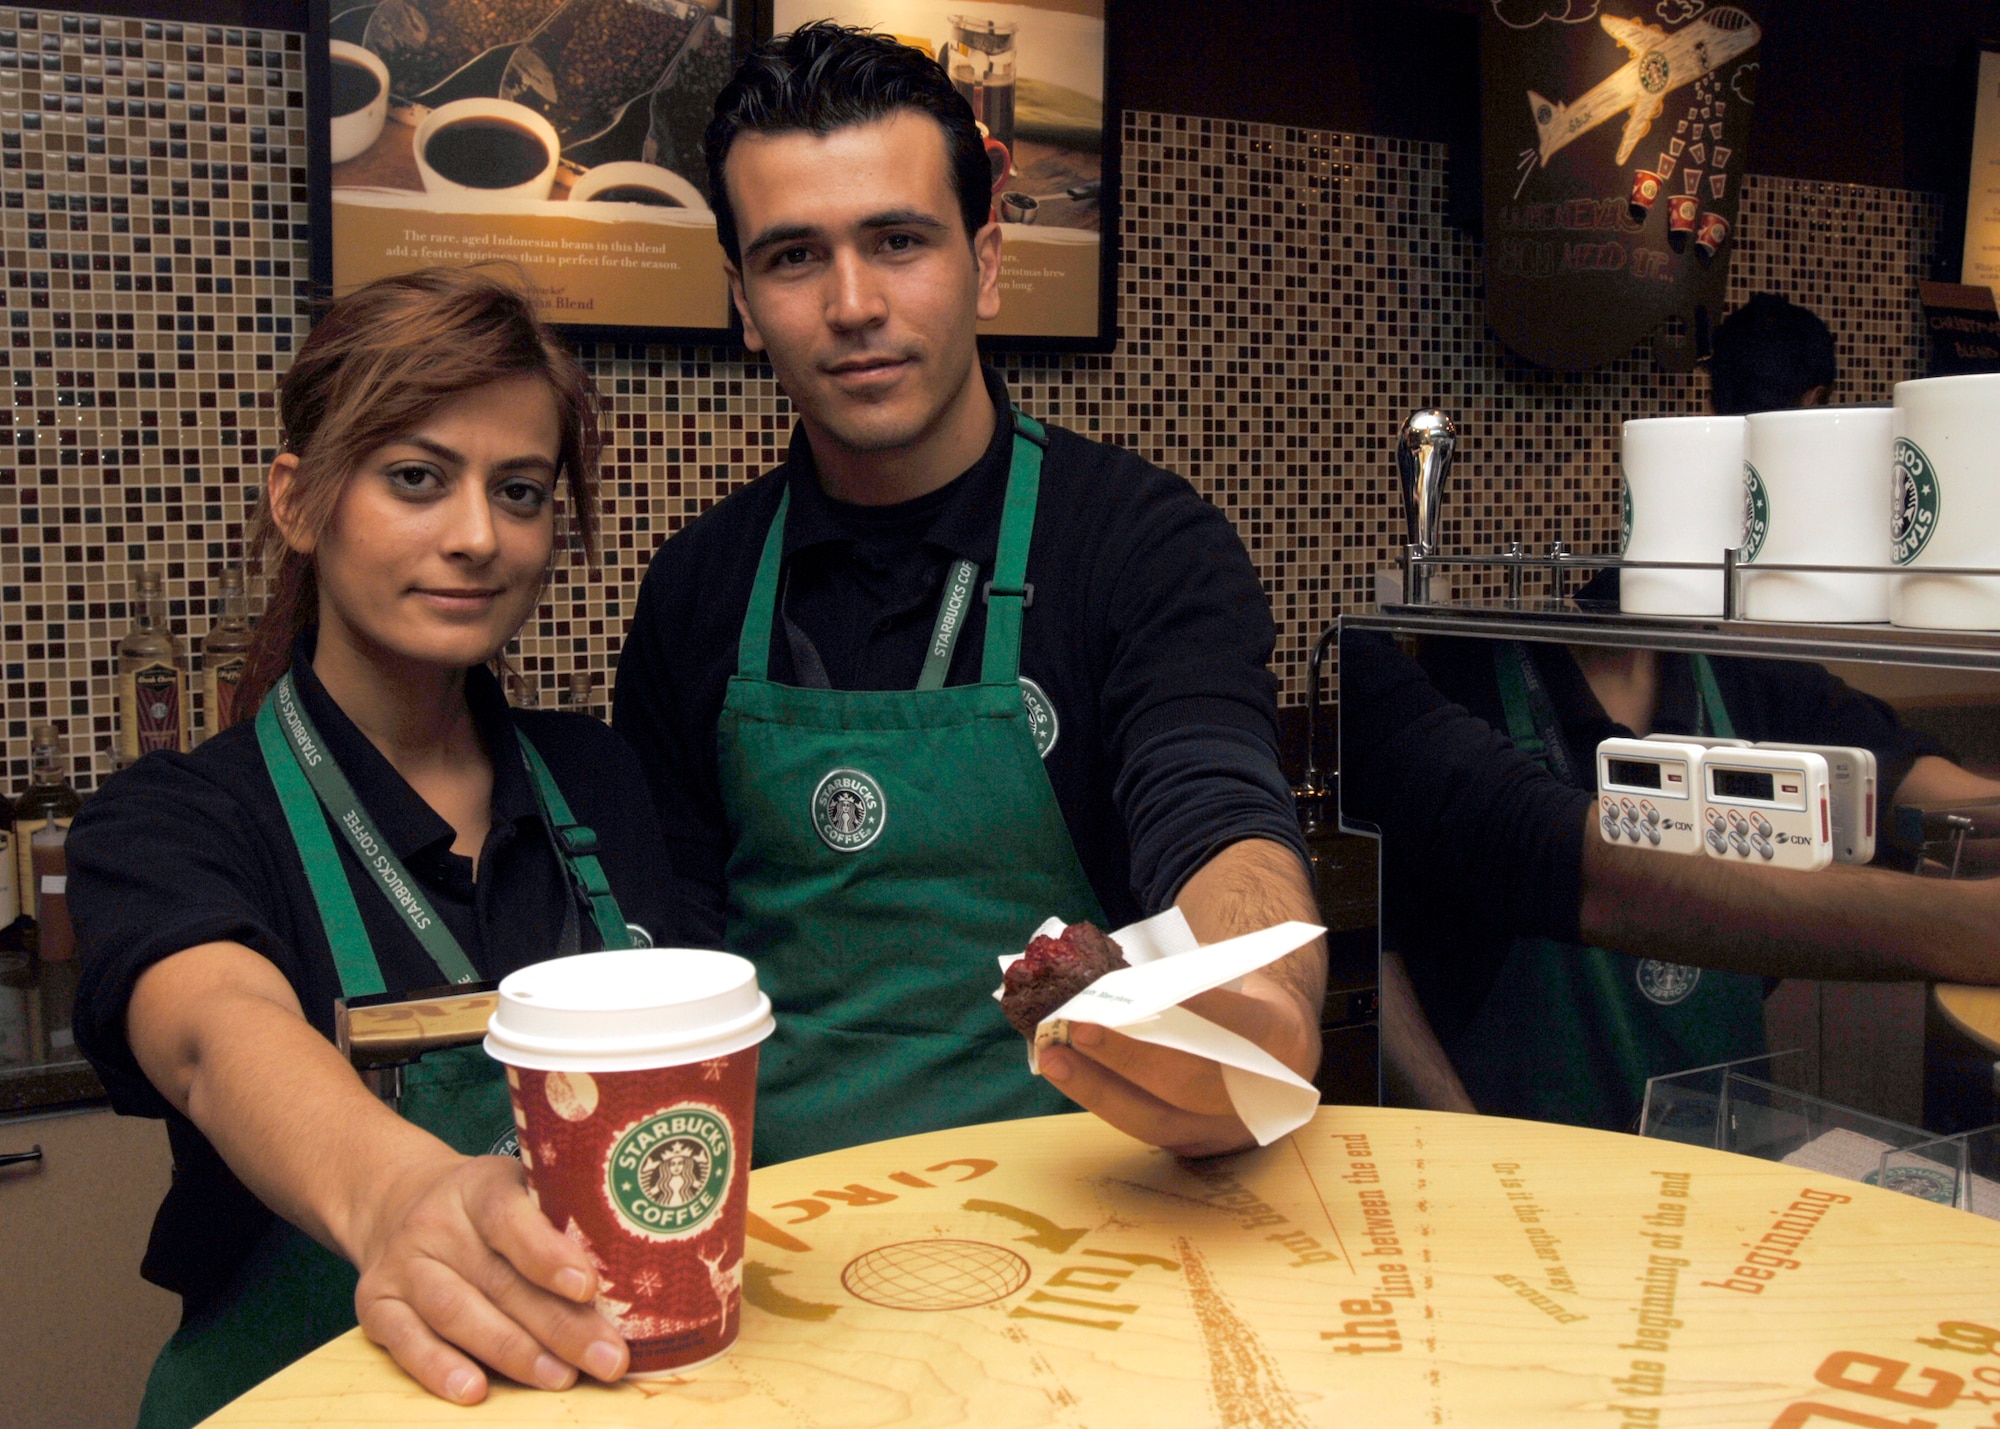 Serpil Tawcav, Incirlik Starbucks barista, and Serkan Tecir, Incirlik Starbucks shift supervisor, present Starbucks products during the "soft opening" of Starbucks at Incirlik Dec. 21. This is the first Starbucks in United States Air Forces Europe. (U.S. Air Force photo by Master Sgt. Edward Holzapfel)